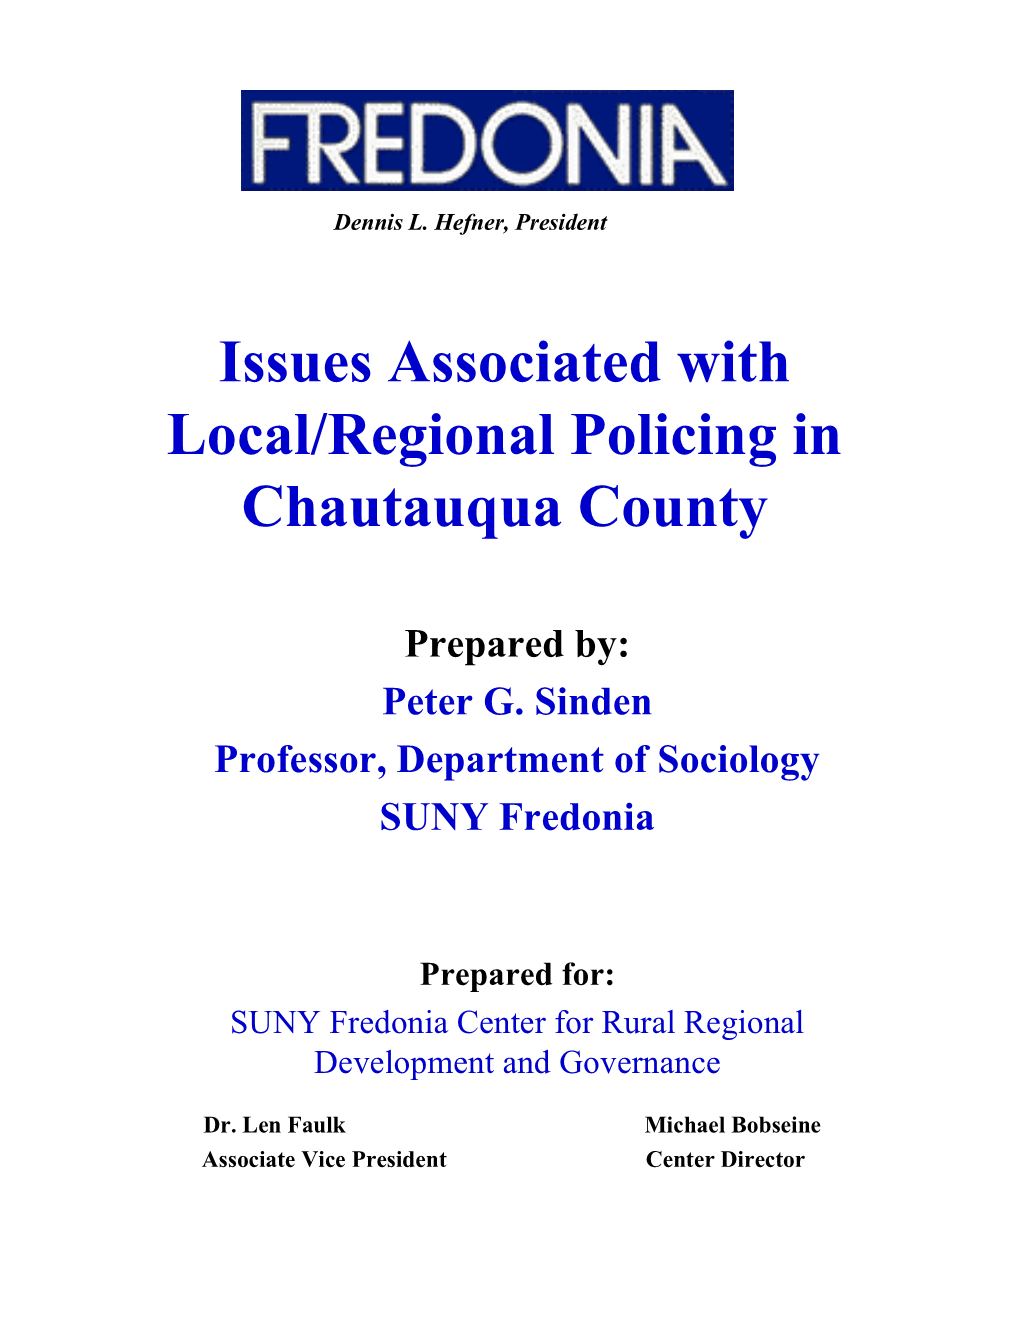 Issues Associated with Local/Regional Policing in Chautauqua County